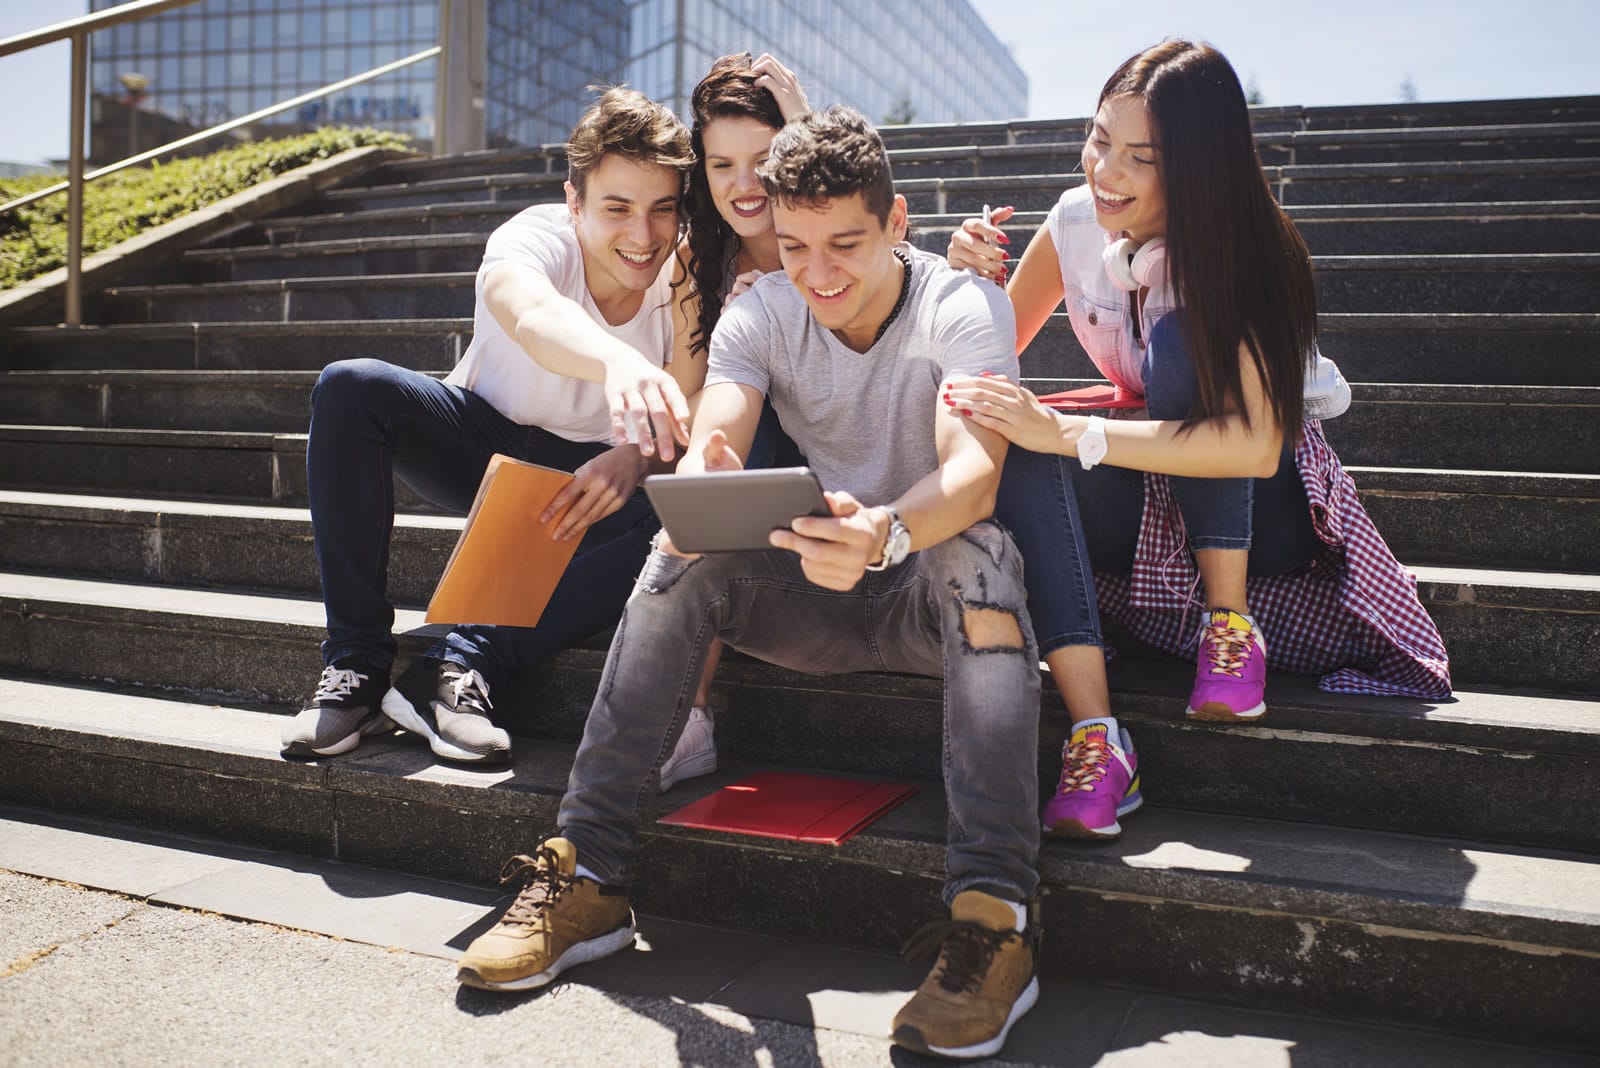 Four teenage friends in casual clothing sitting on steps smiling and laughing